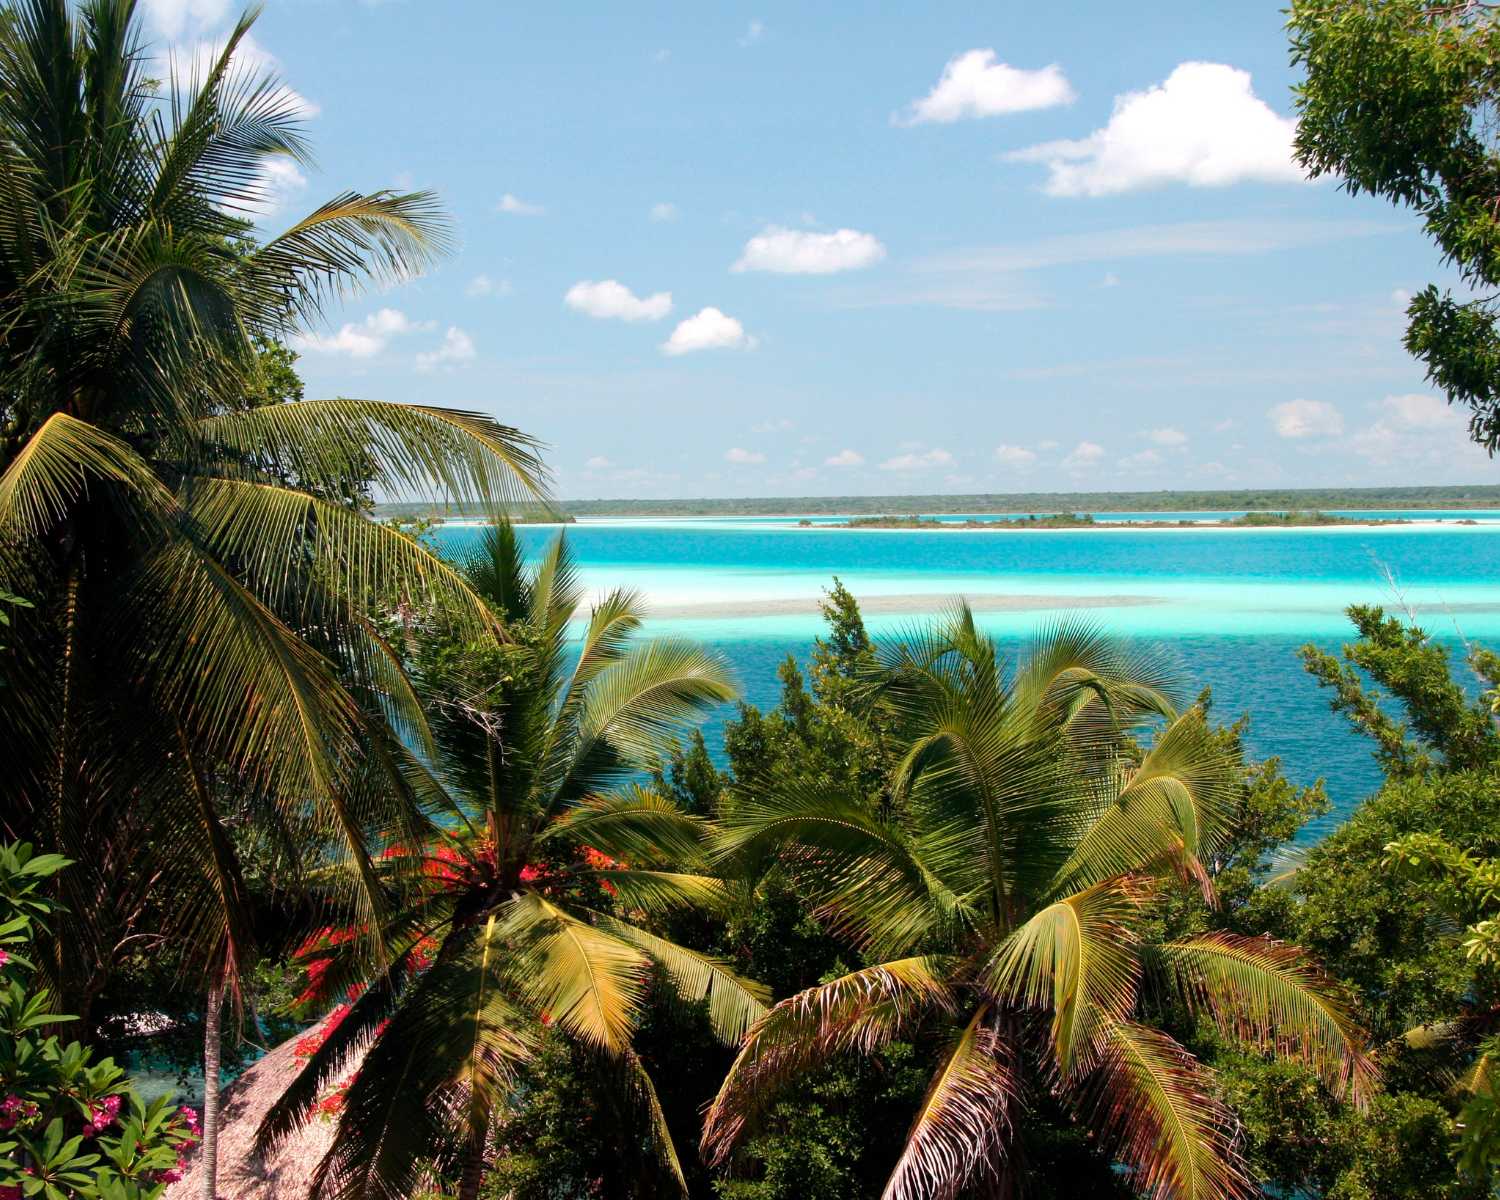 Things To Do In Bacalar, MX